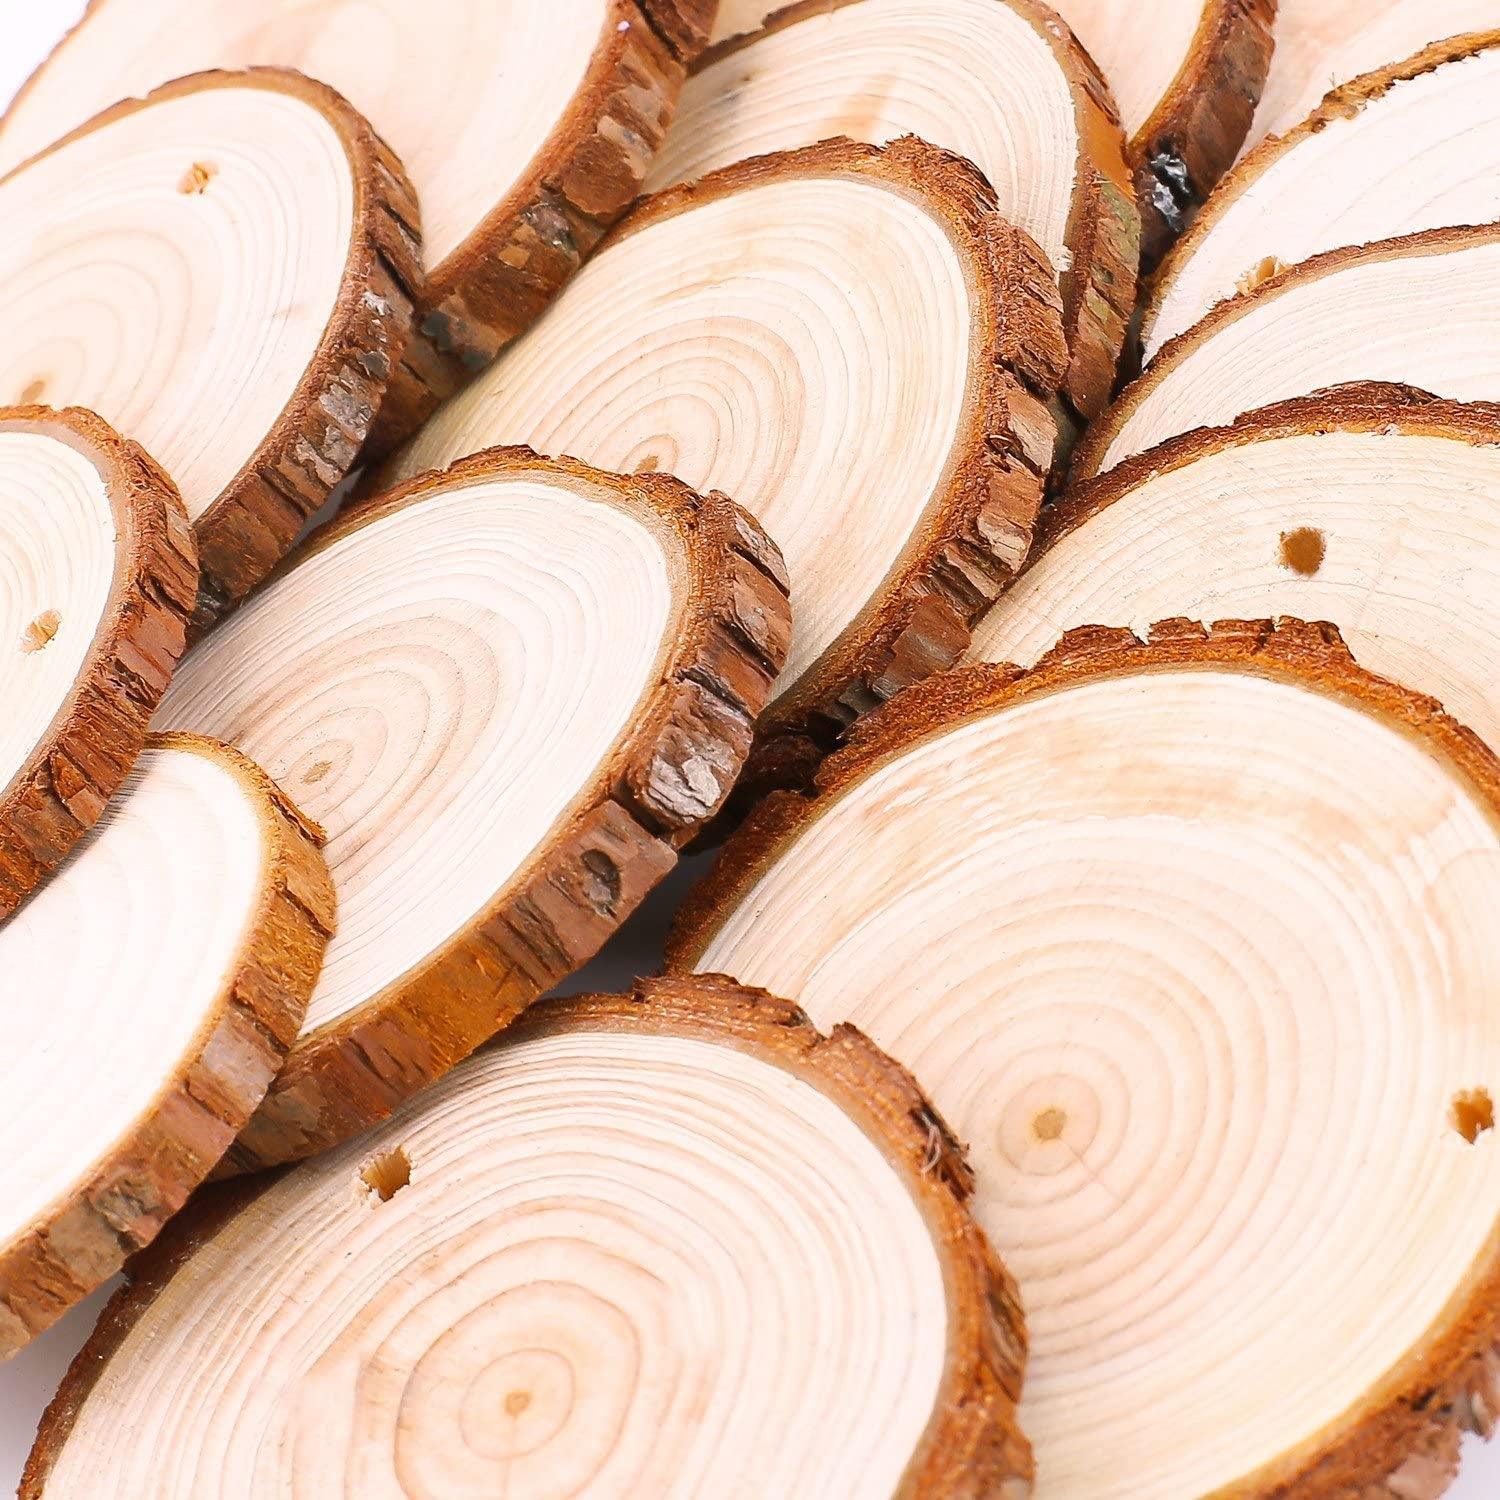 CertBuy 50 Pcs Natural Wood Slices 2.8-3 Inches, Undrilled Round Wood Tree  Slices, Crafts Wooden Circles with Bark for